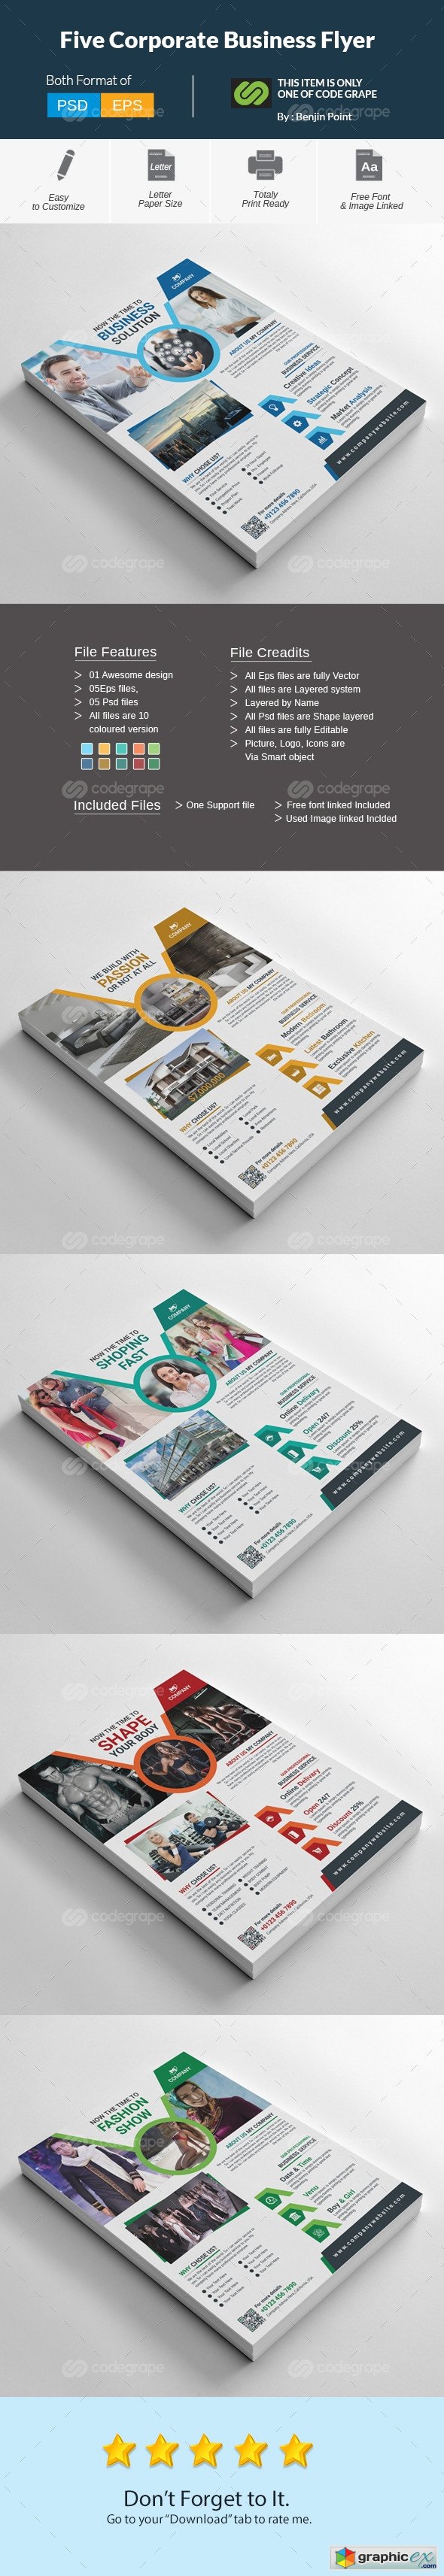 Corporate Business Flyer 9242